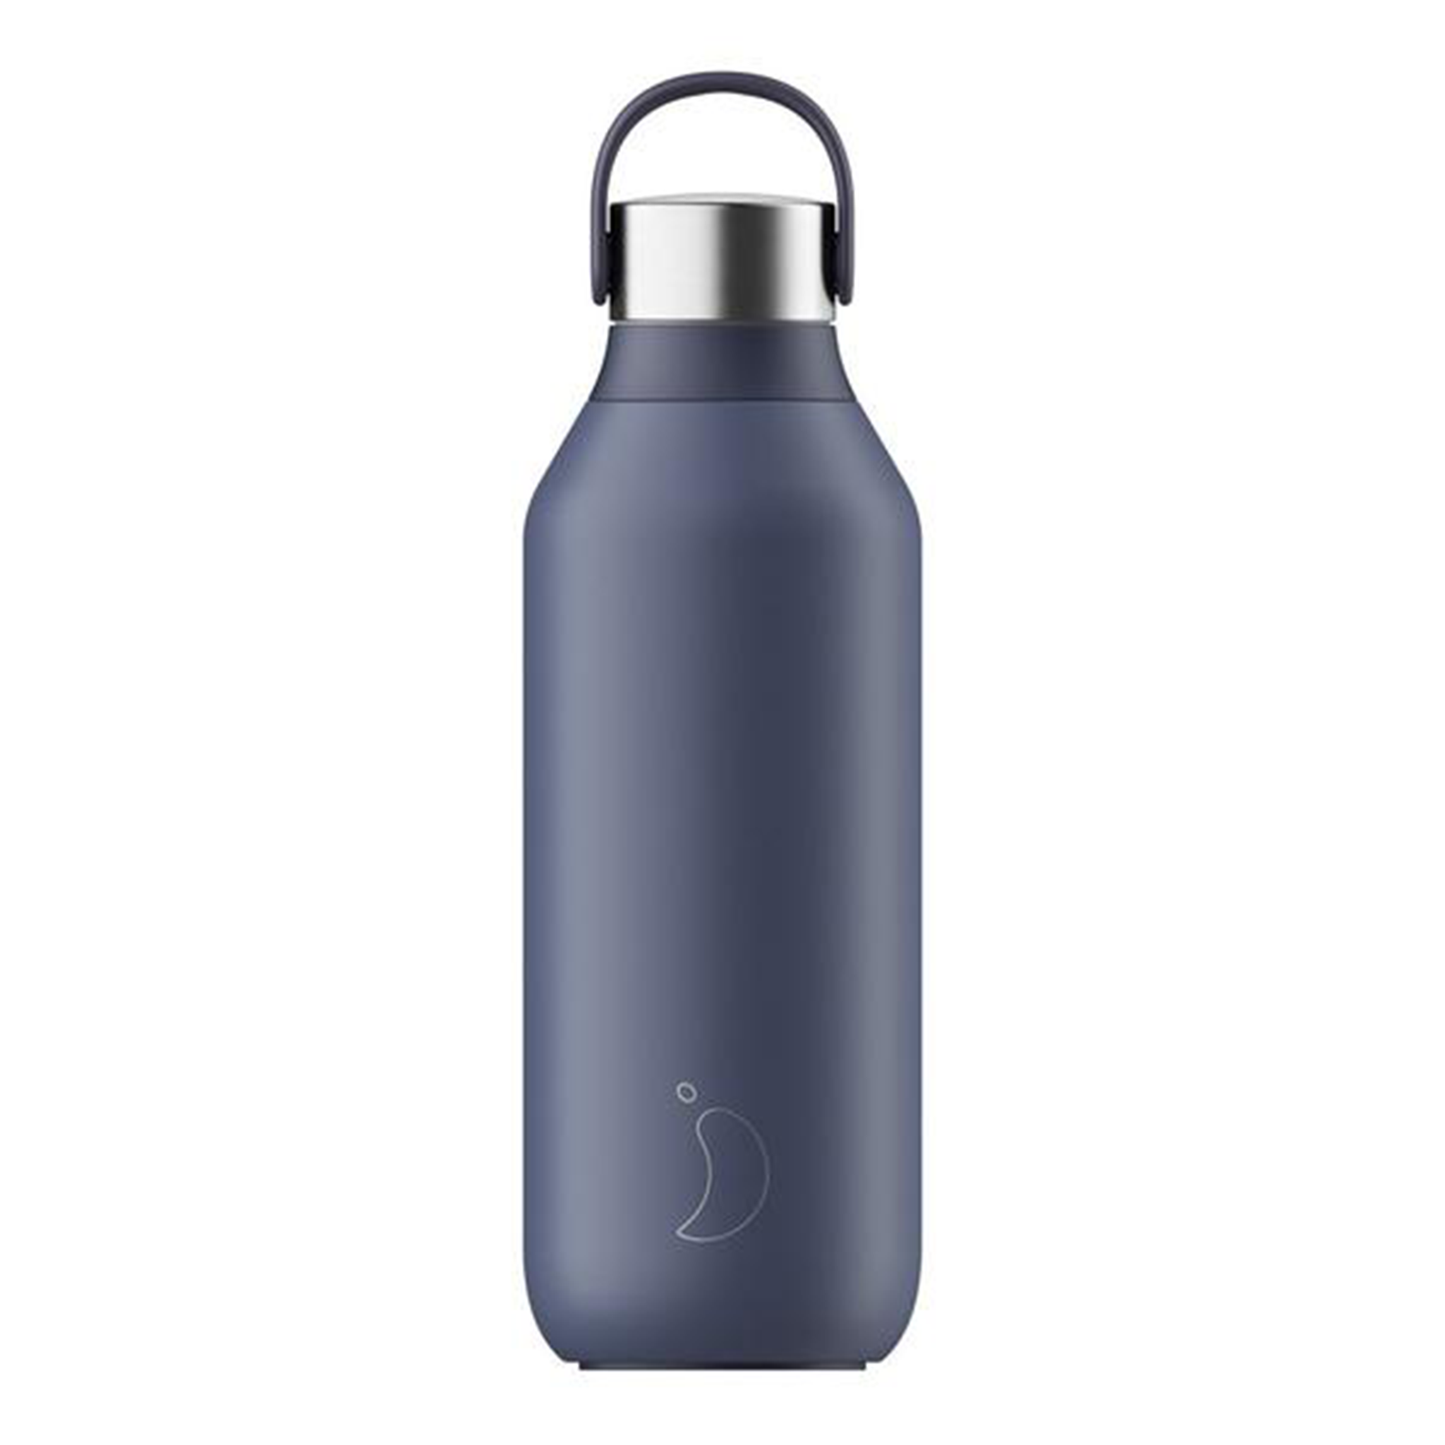 a navy blue chilly's bottle with a stainless steel cap and silicone carry loop